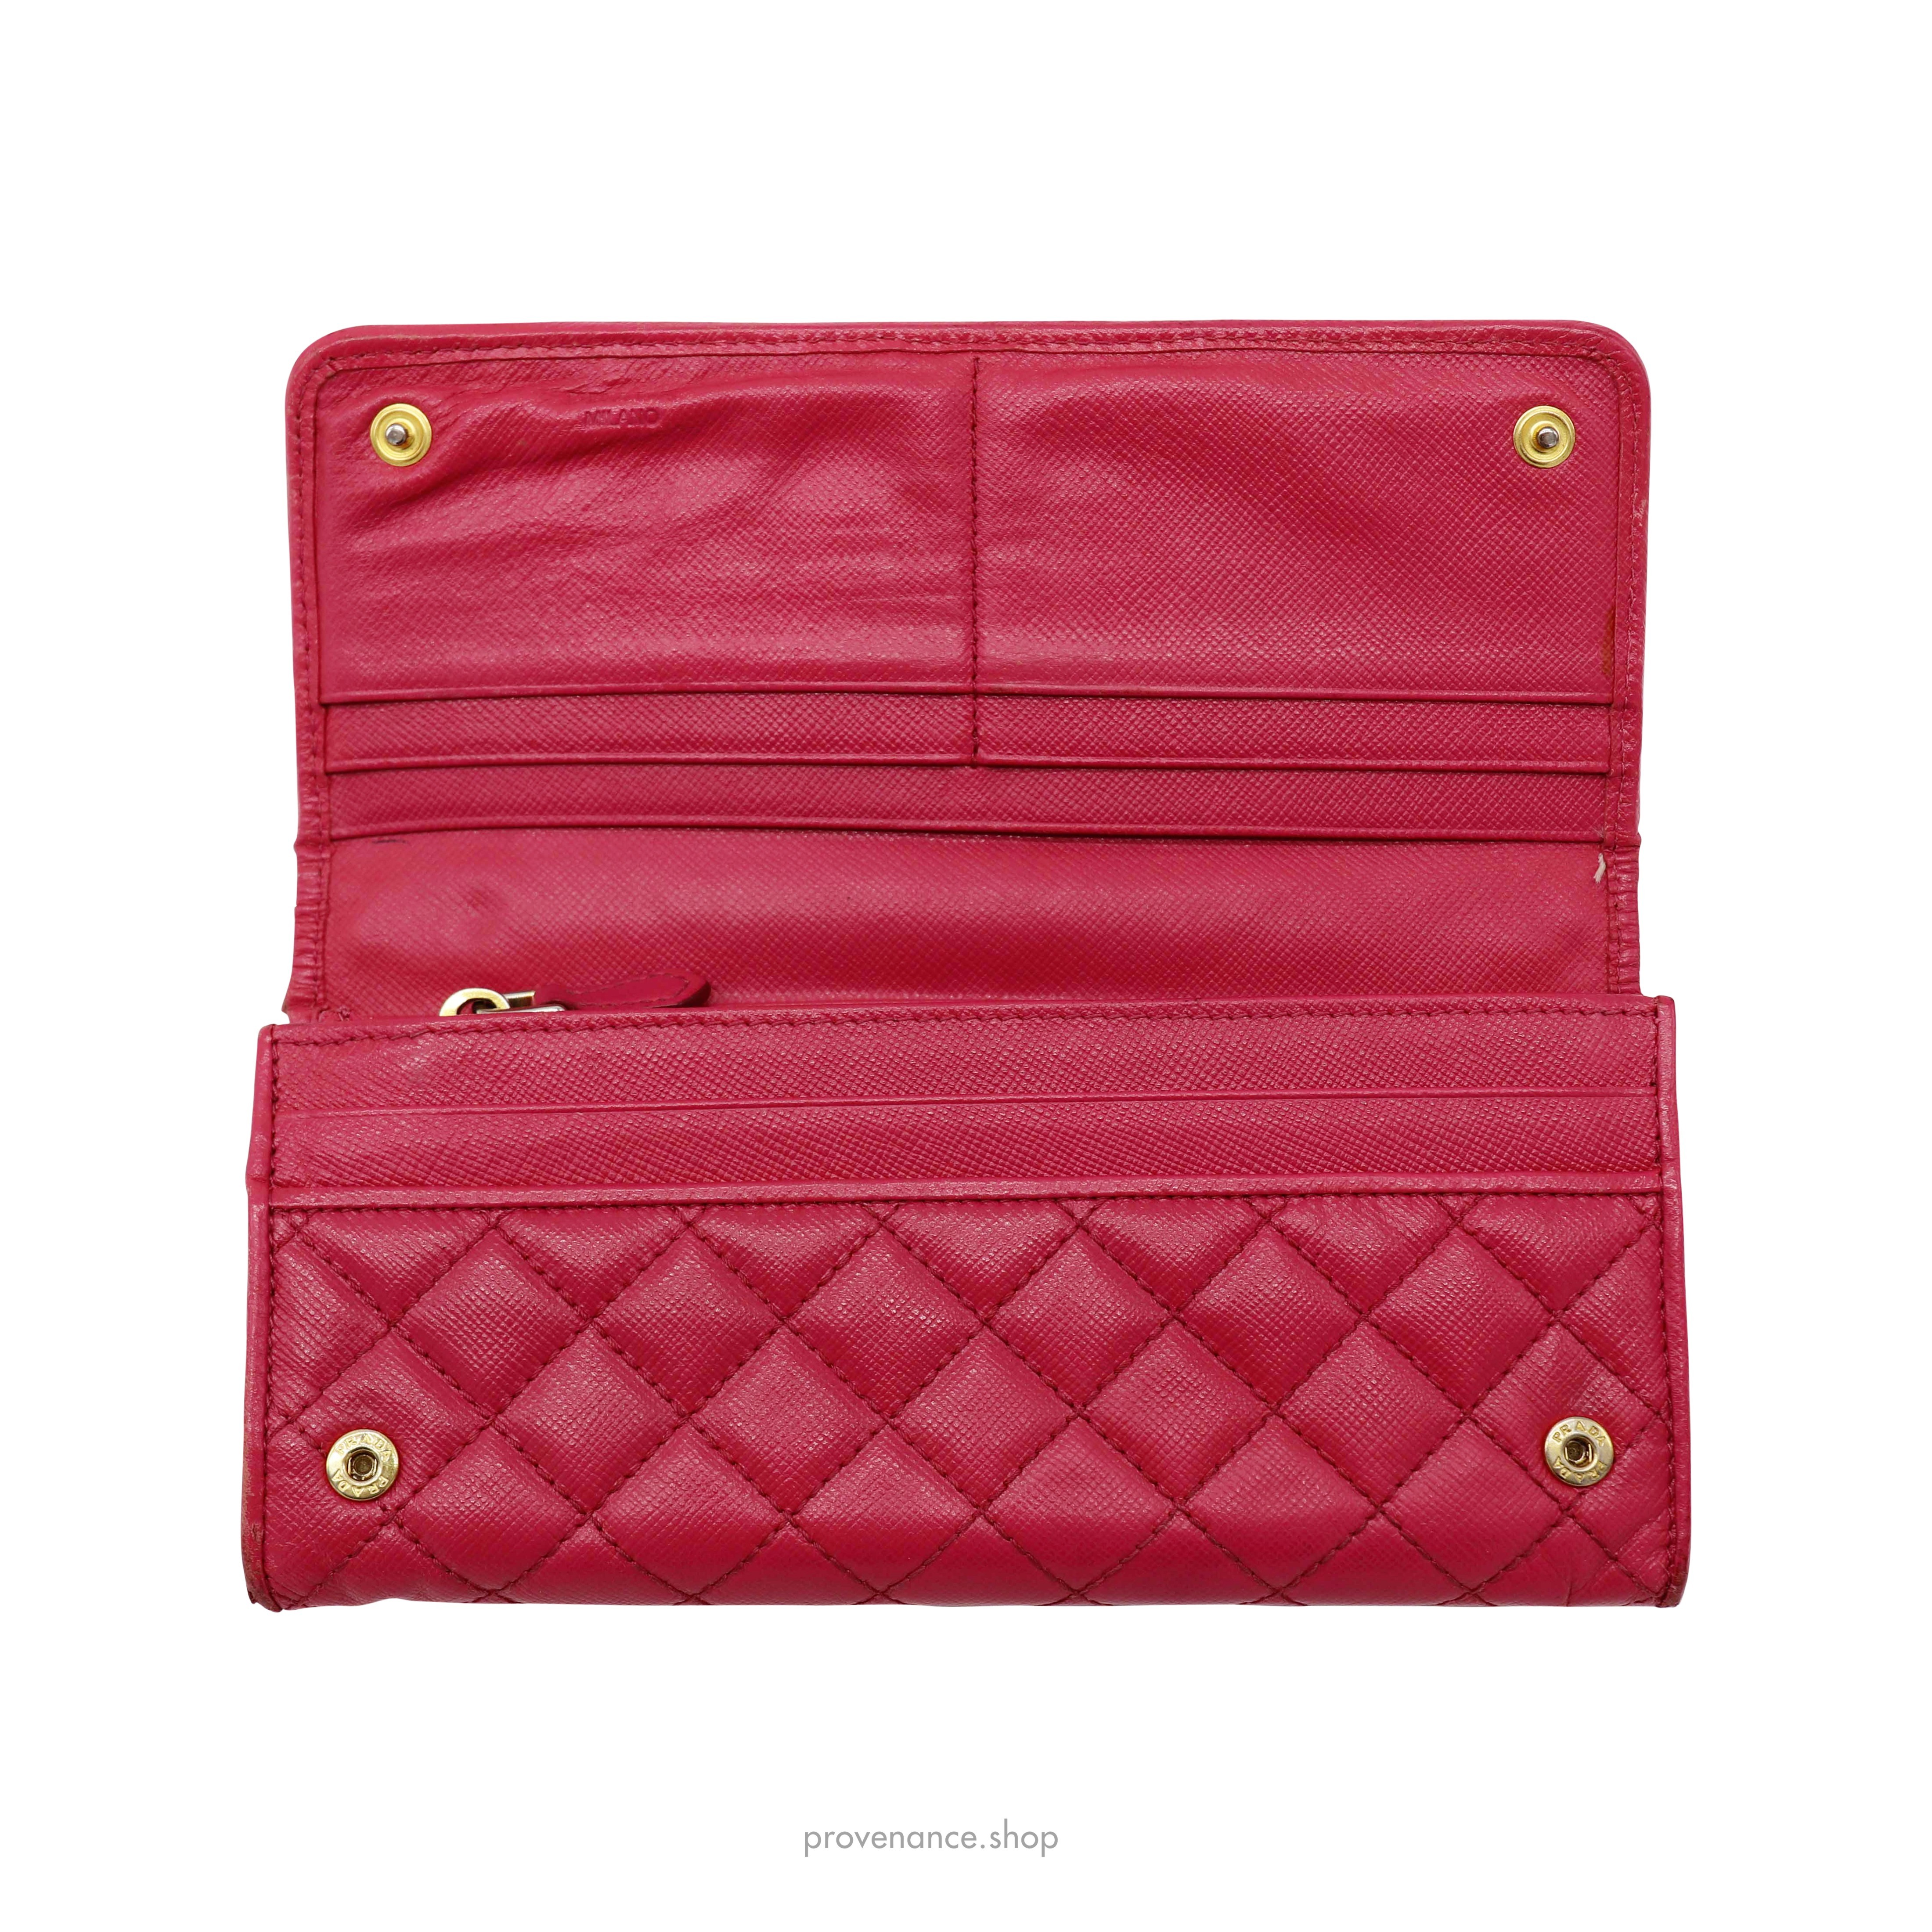 Prada Long Wallet - Pink Quilted Saffiano Leather - 6